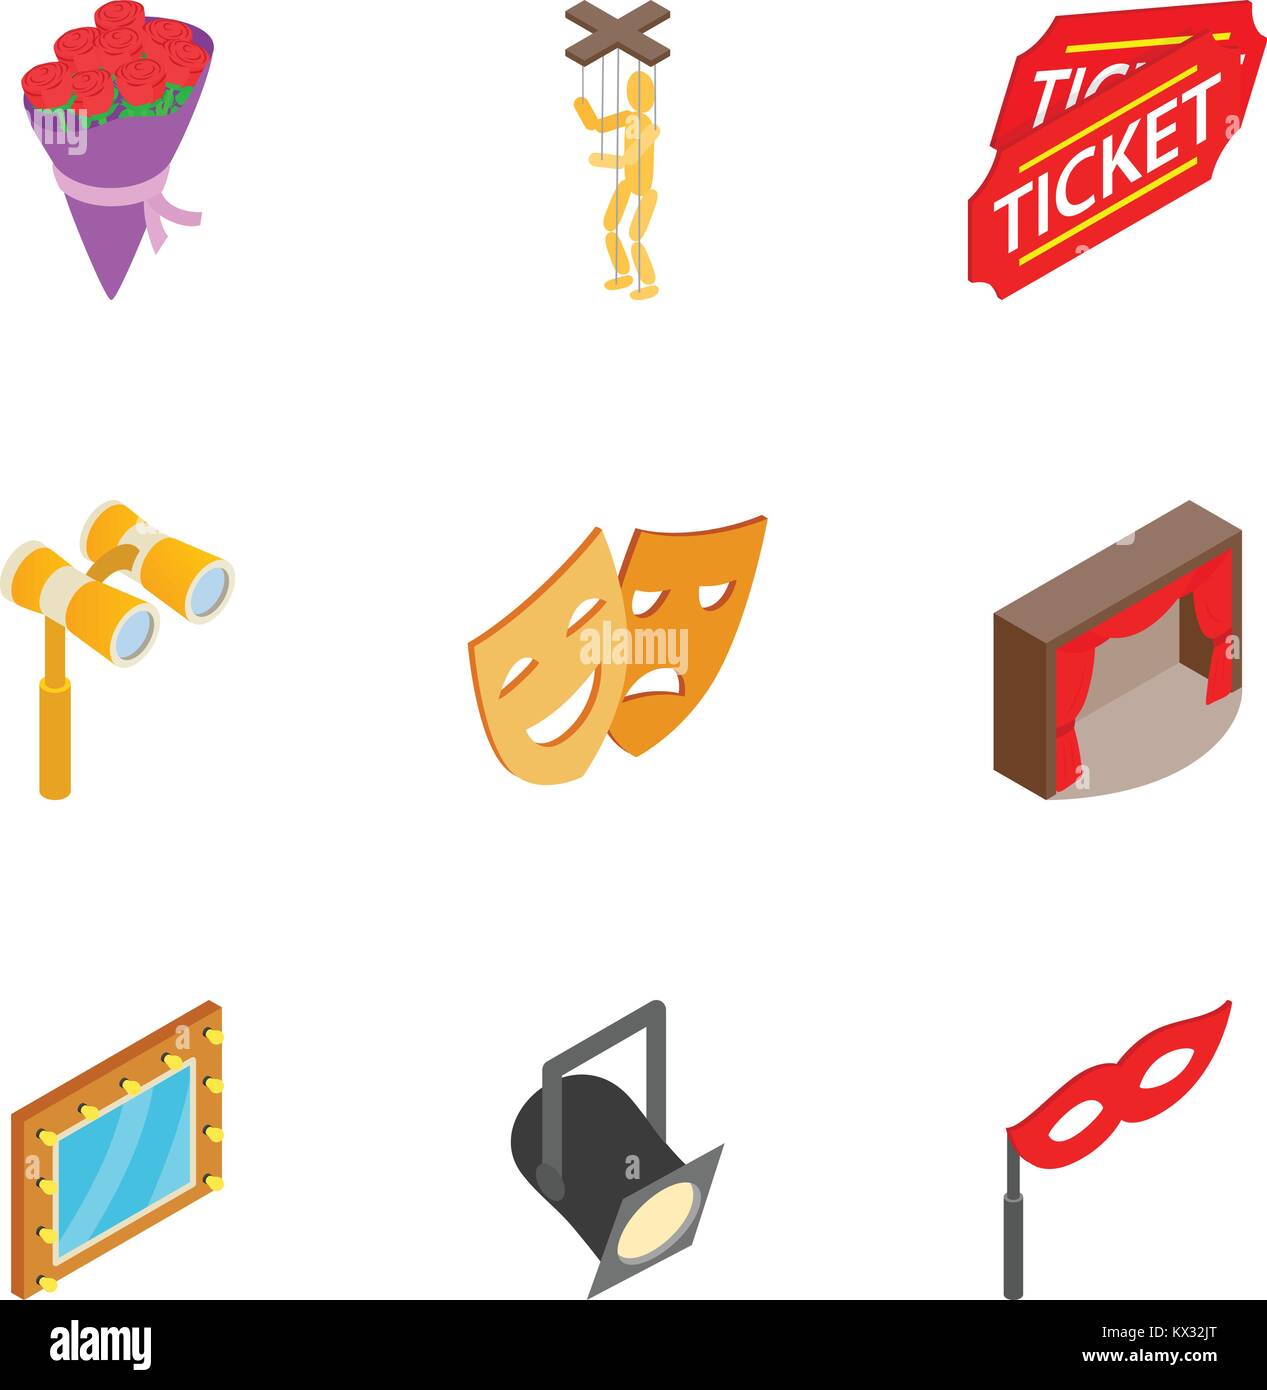 Theatre acting performance icons set Stock Vector